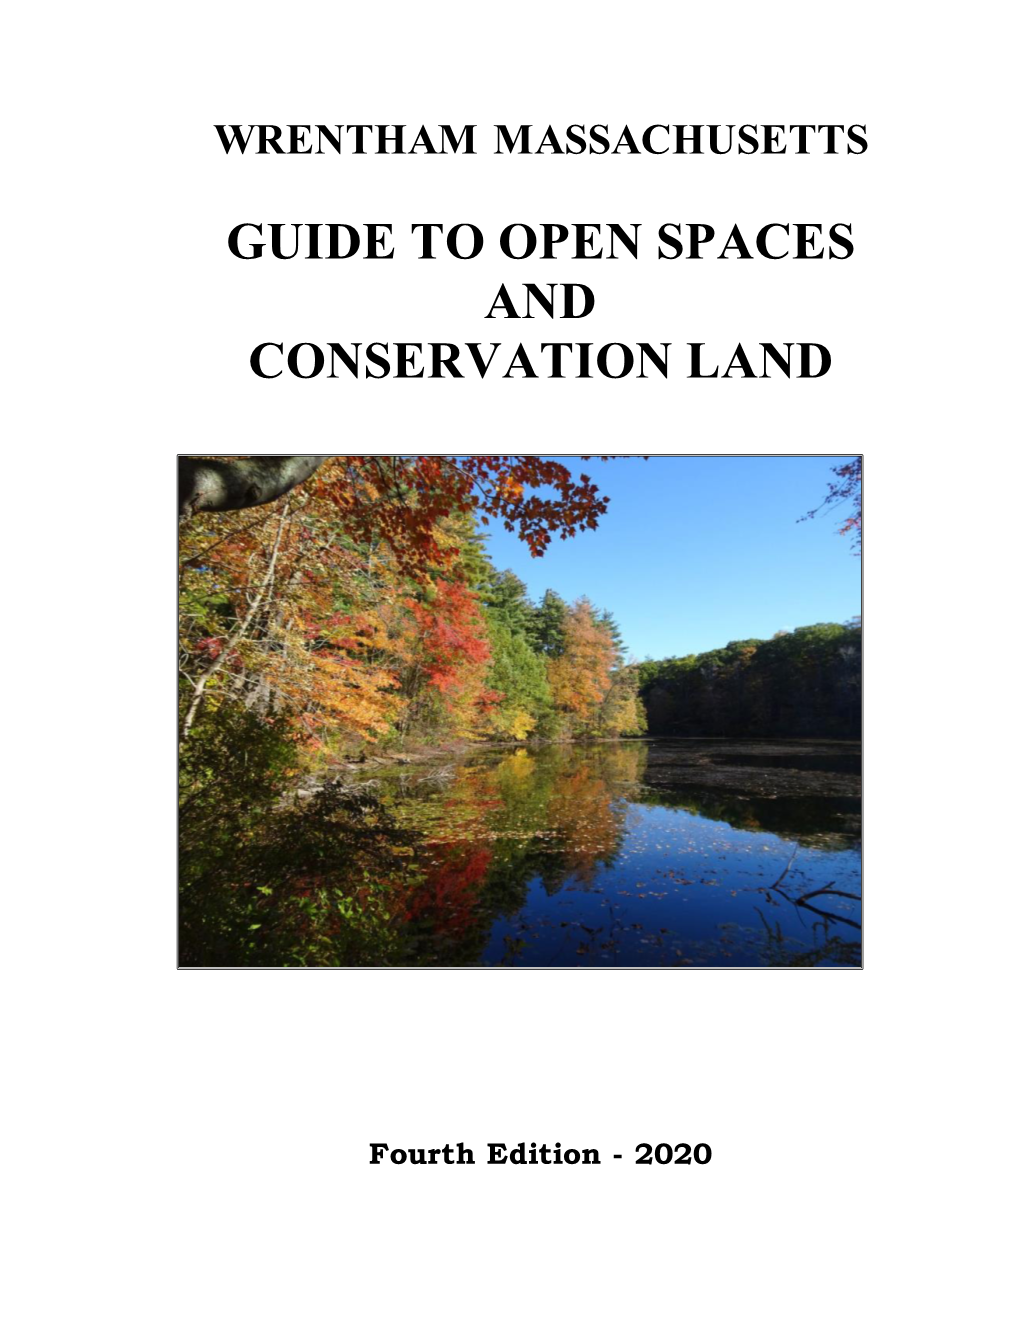 Wrentham Guide to Open Spaces and Conservation Lands